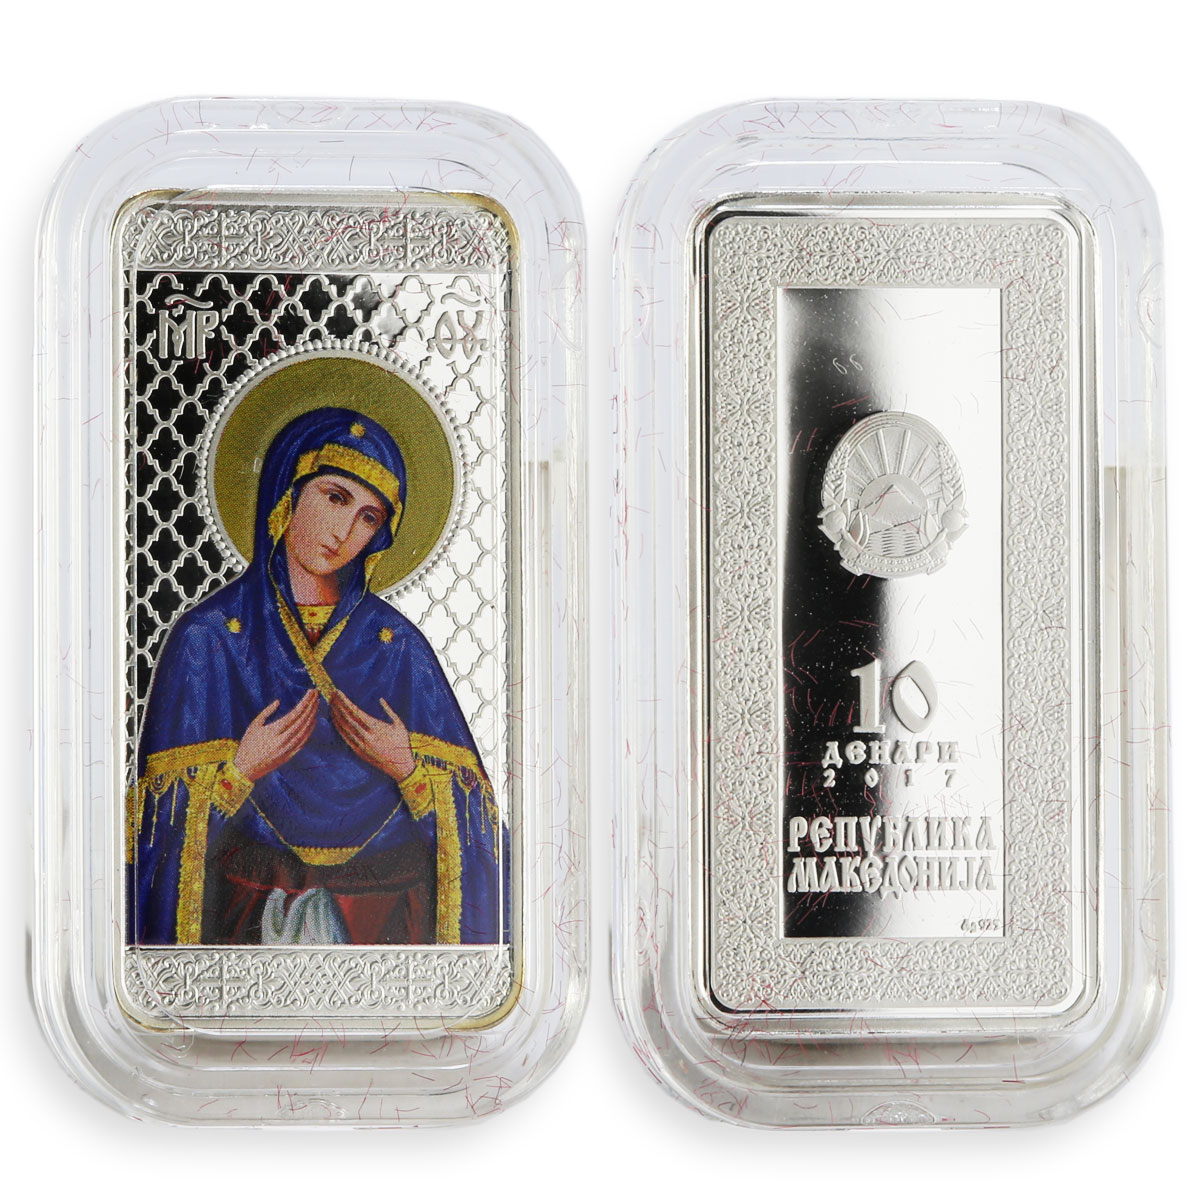 Macedonia set of 3 coins Jesus, Mother of God, St. Nicholas colored silver 2017